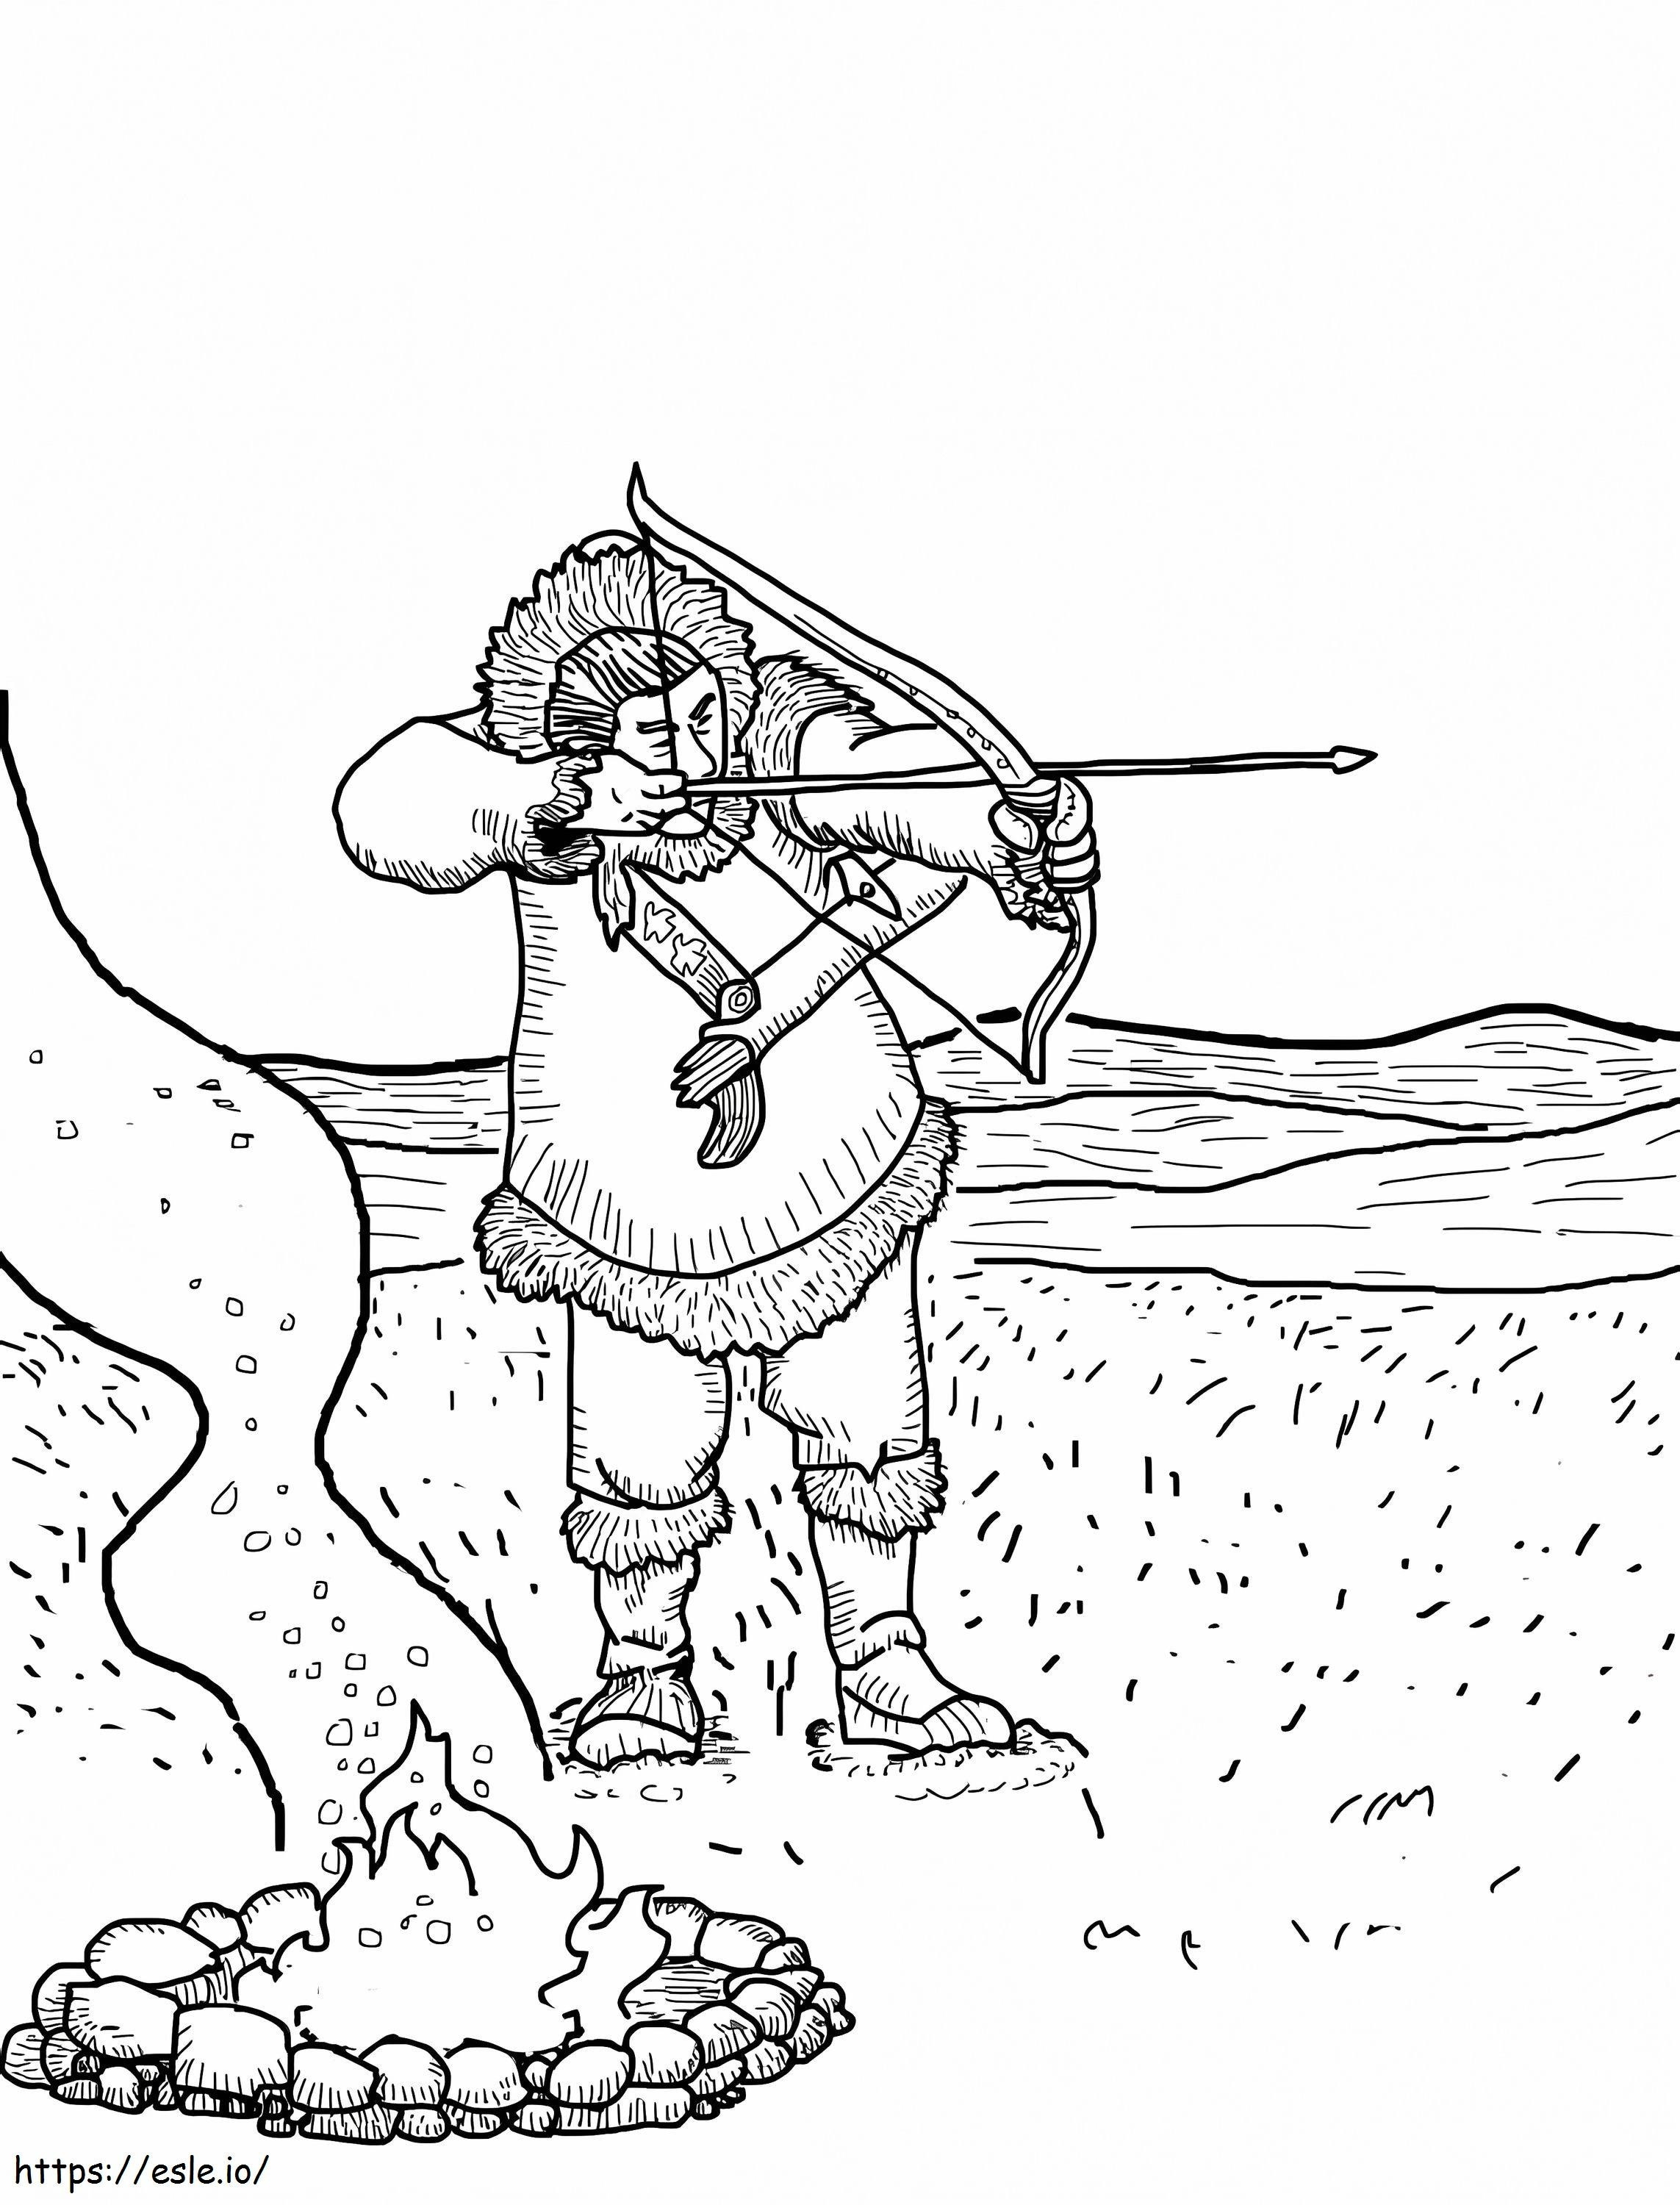 Hunting 5 coloring page